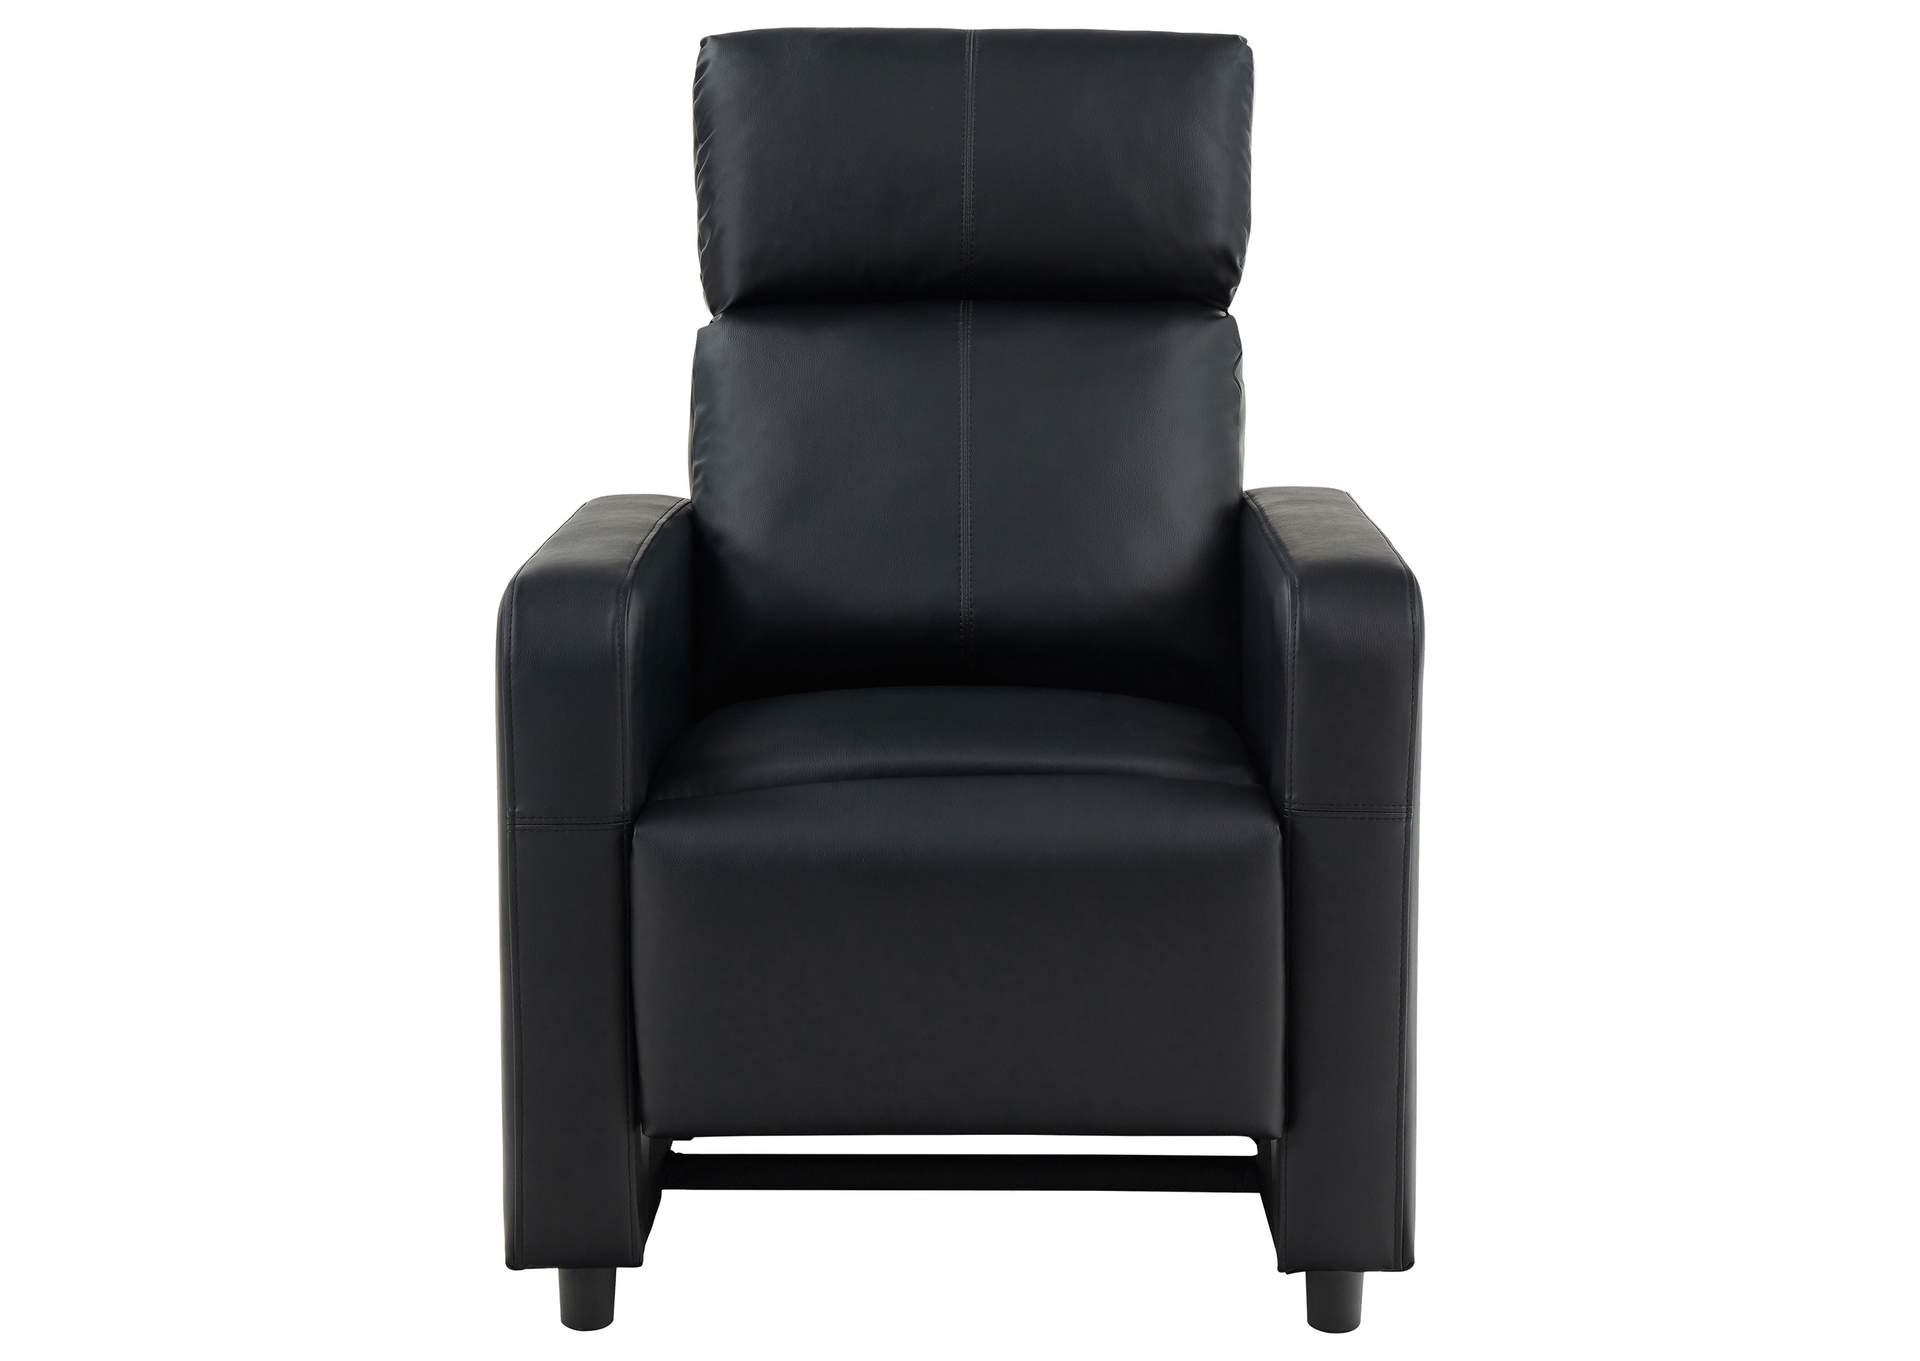 Toohey Home Theater Push Back Recliner Black,Coaster Furniture